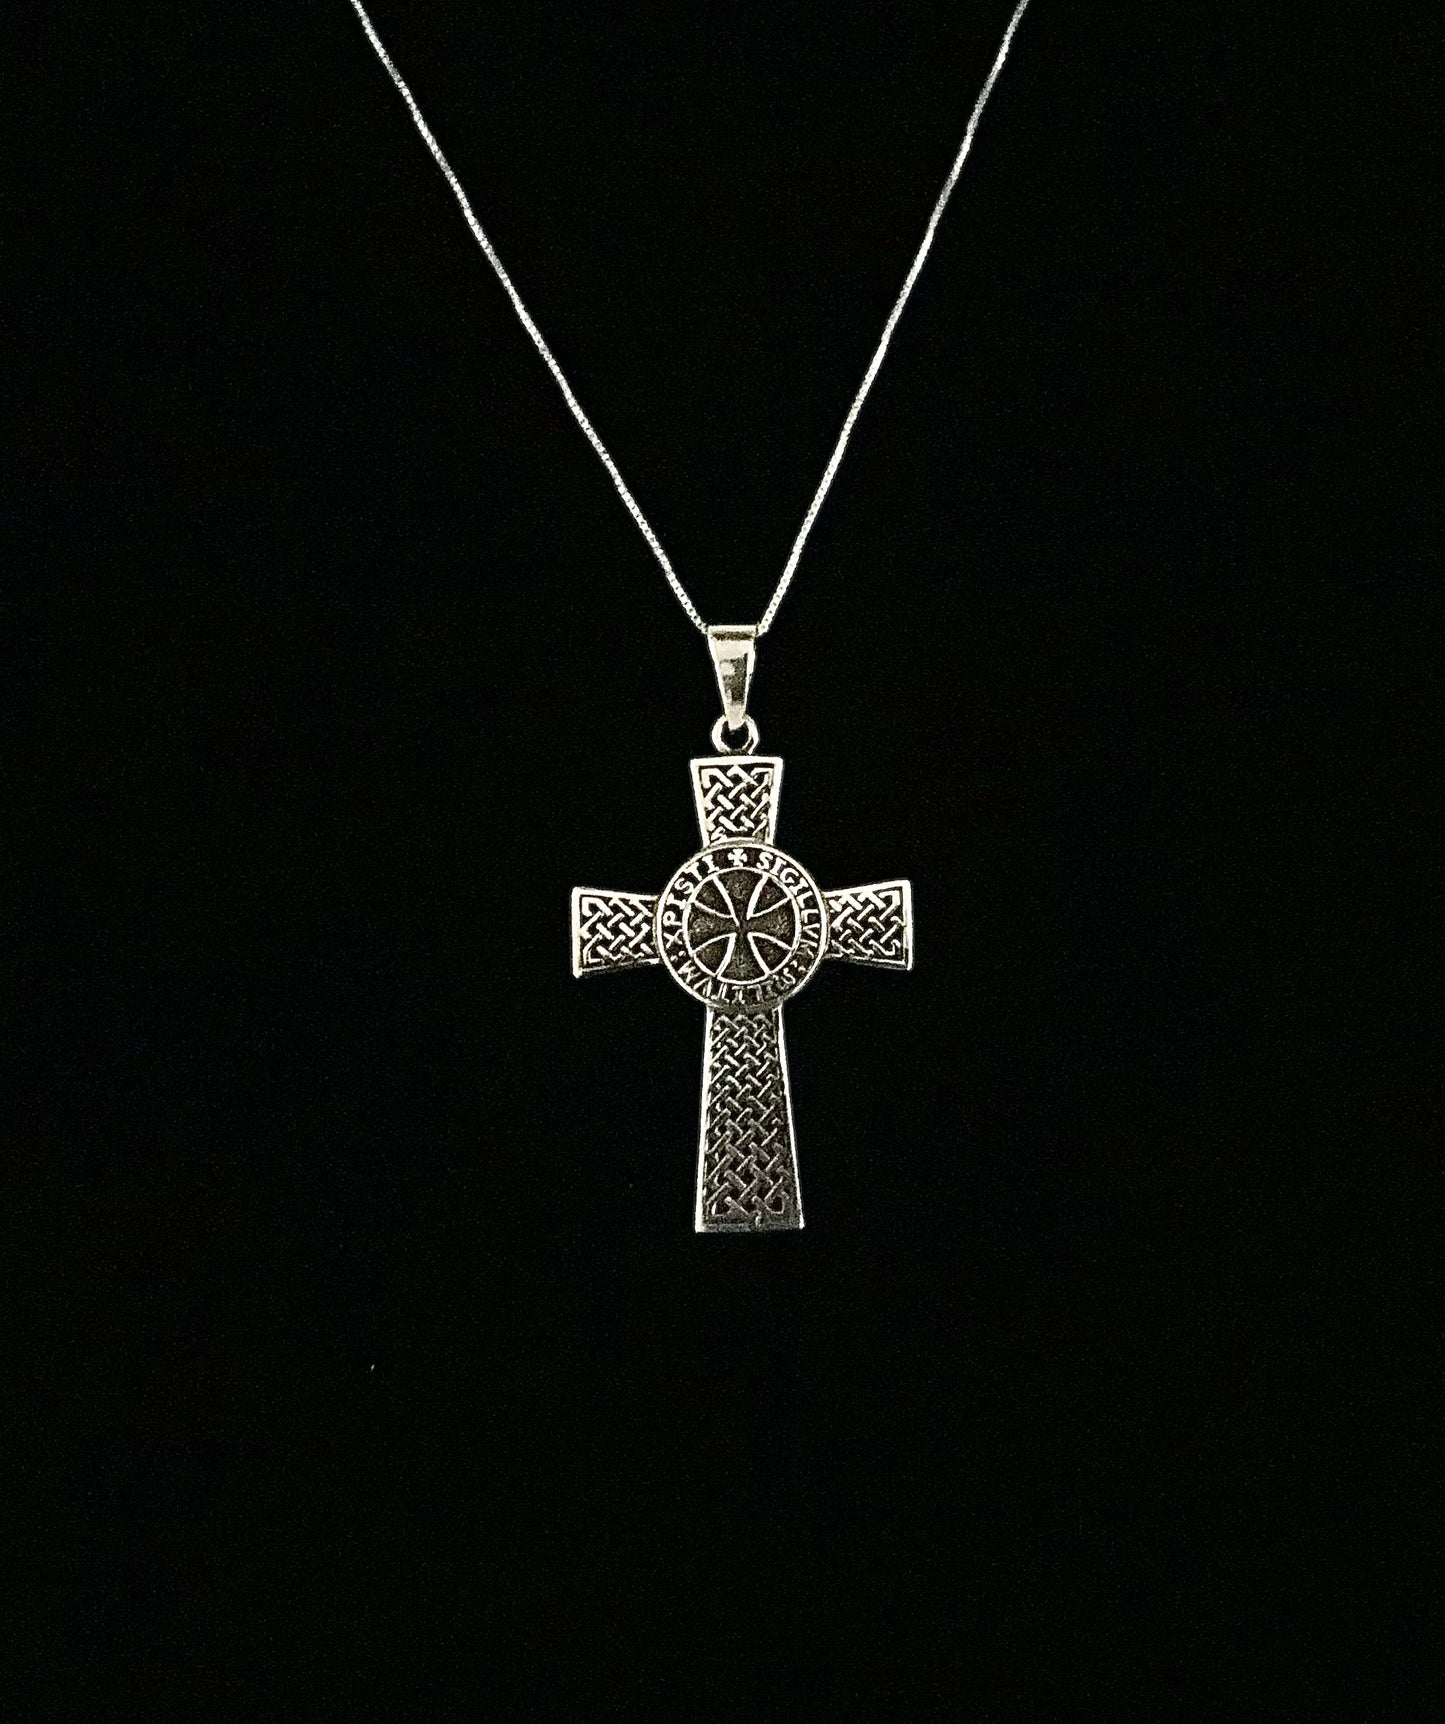 Large Handcast 925 Sterling Silver Crusader Knights Templar Cross Pendant + Free Chain Necklace